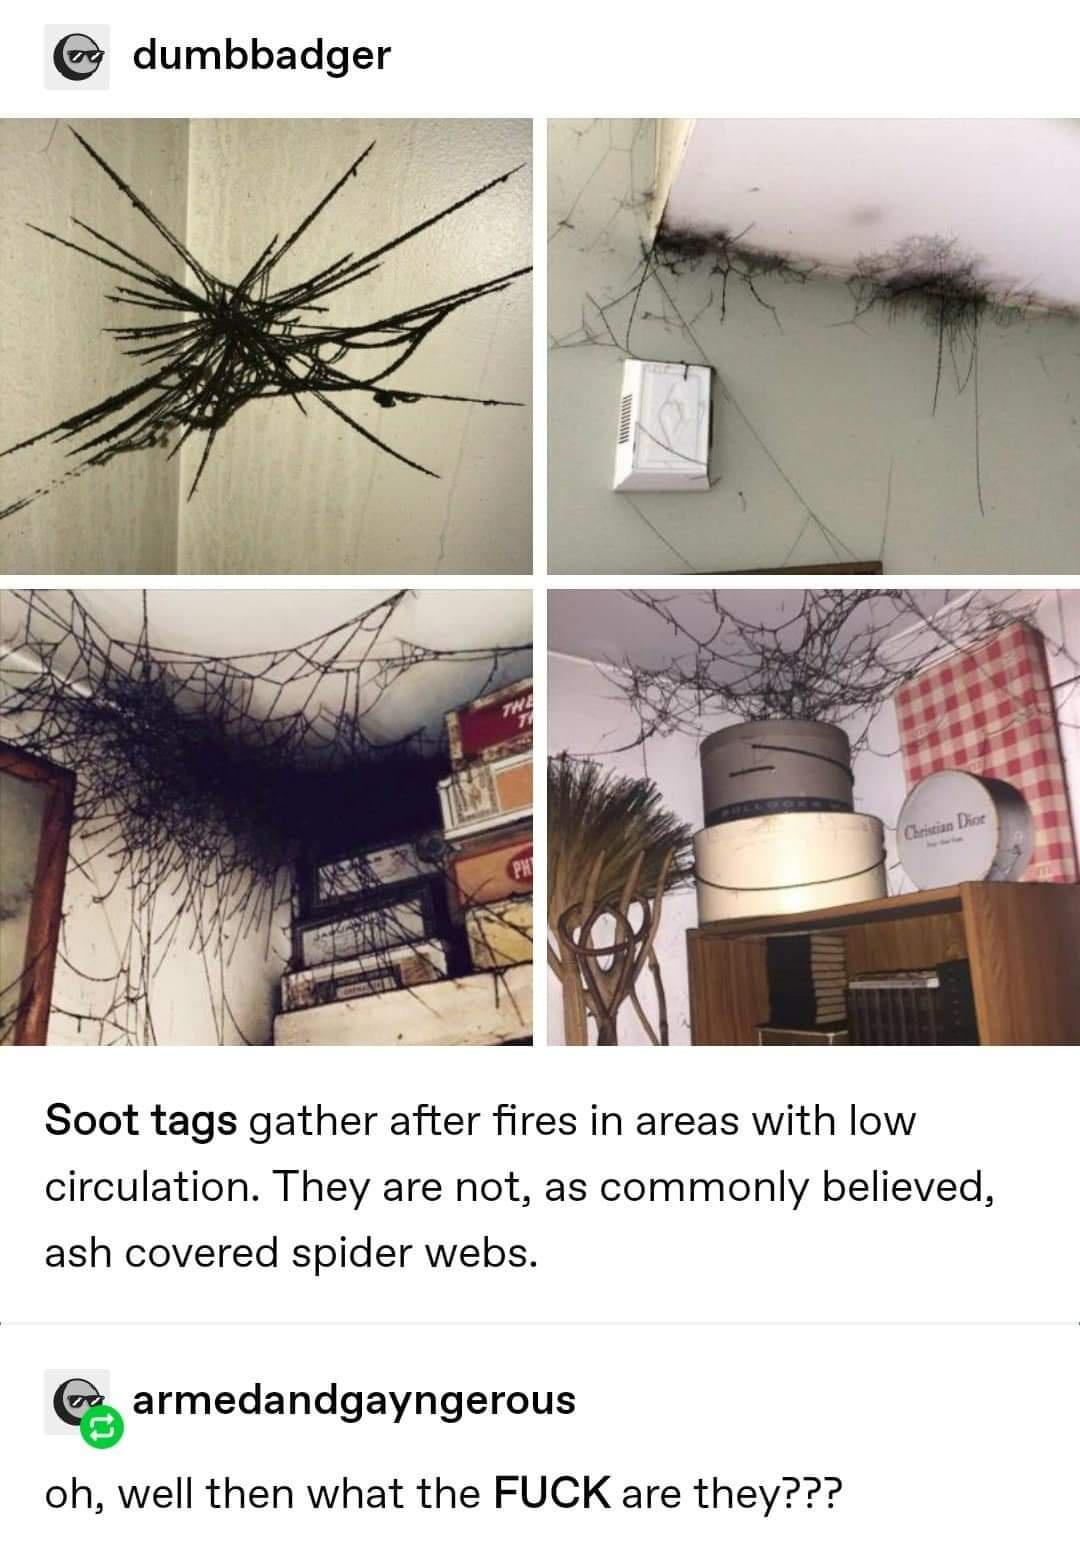 funny memes and pics - design - Ce dumbbadger Tha Christian Dior Ph Soot tags gather after fires in areas with low circulation. They are not, as commonly believed, ash covered spider webs. armedandgayngerous oh, well then what the Fuck are they???